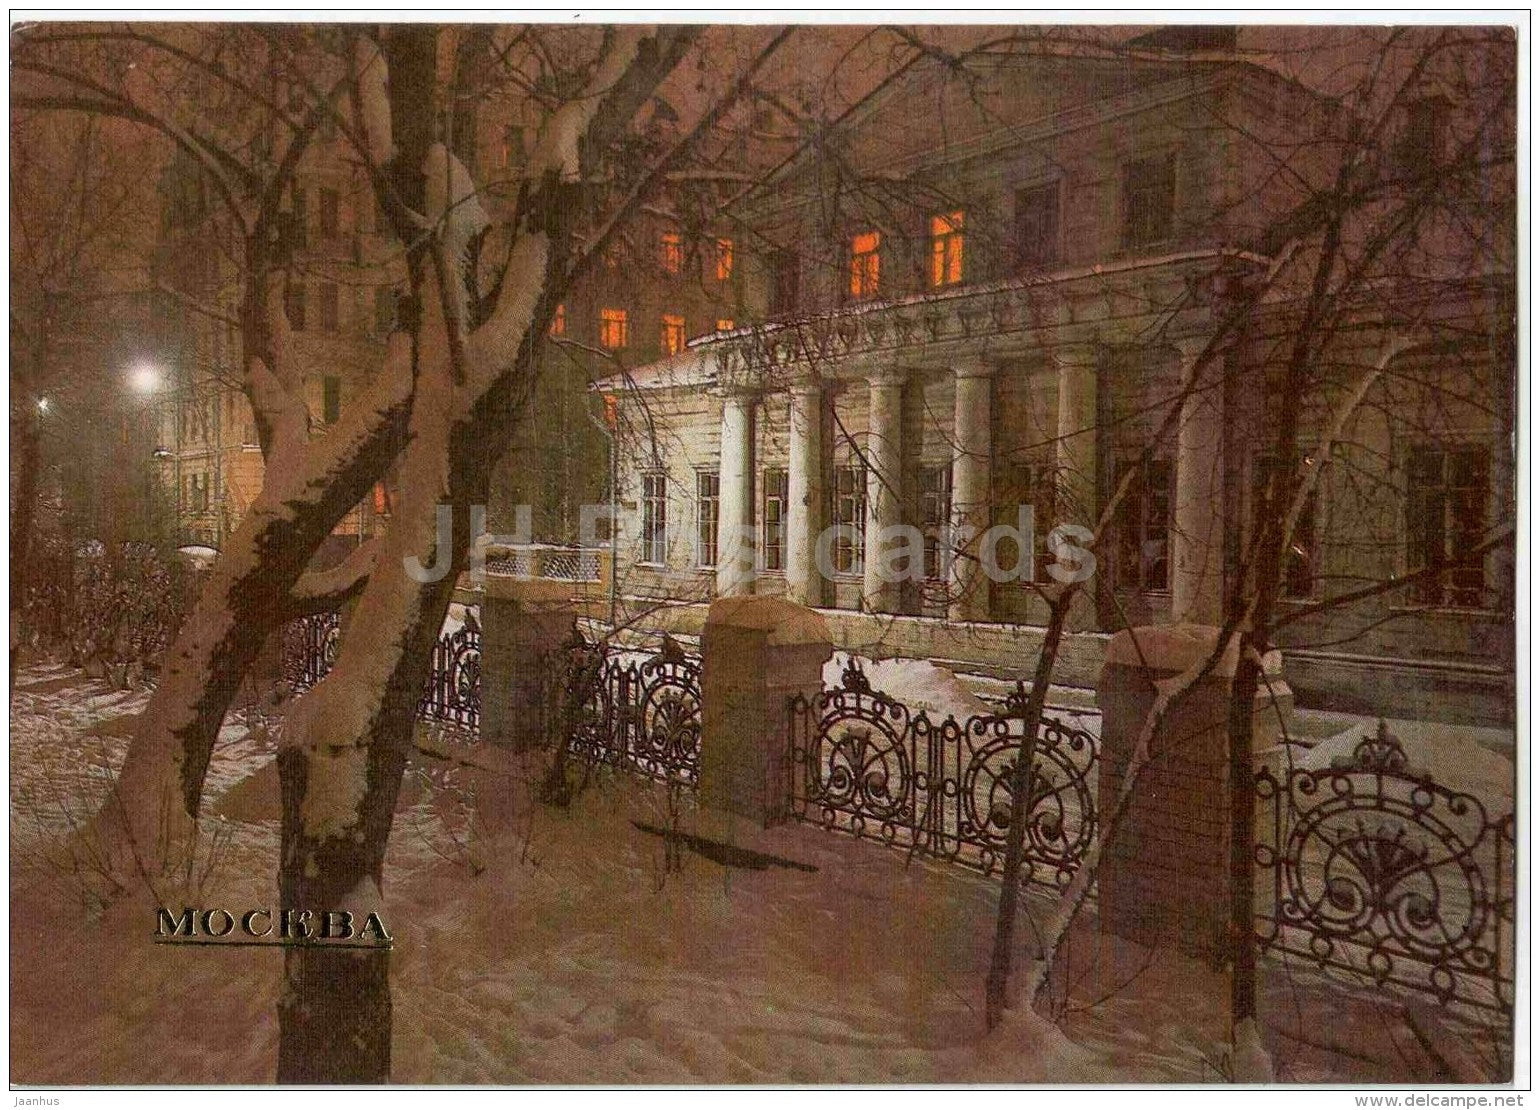 Vesnin street - architectural monument at old Arbaty - Moscow - 1984 - Russia USSR - unused - JH Postcards